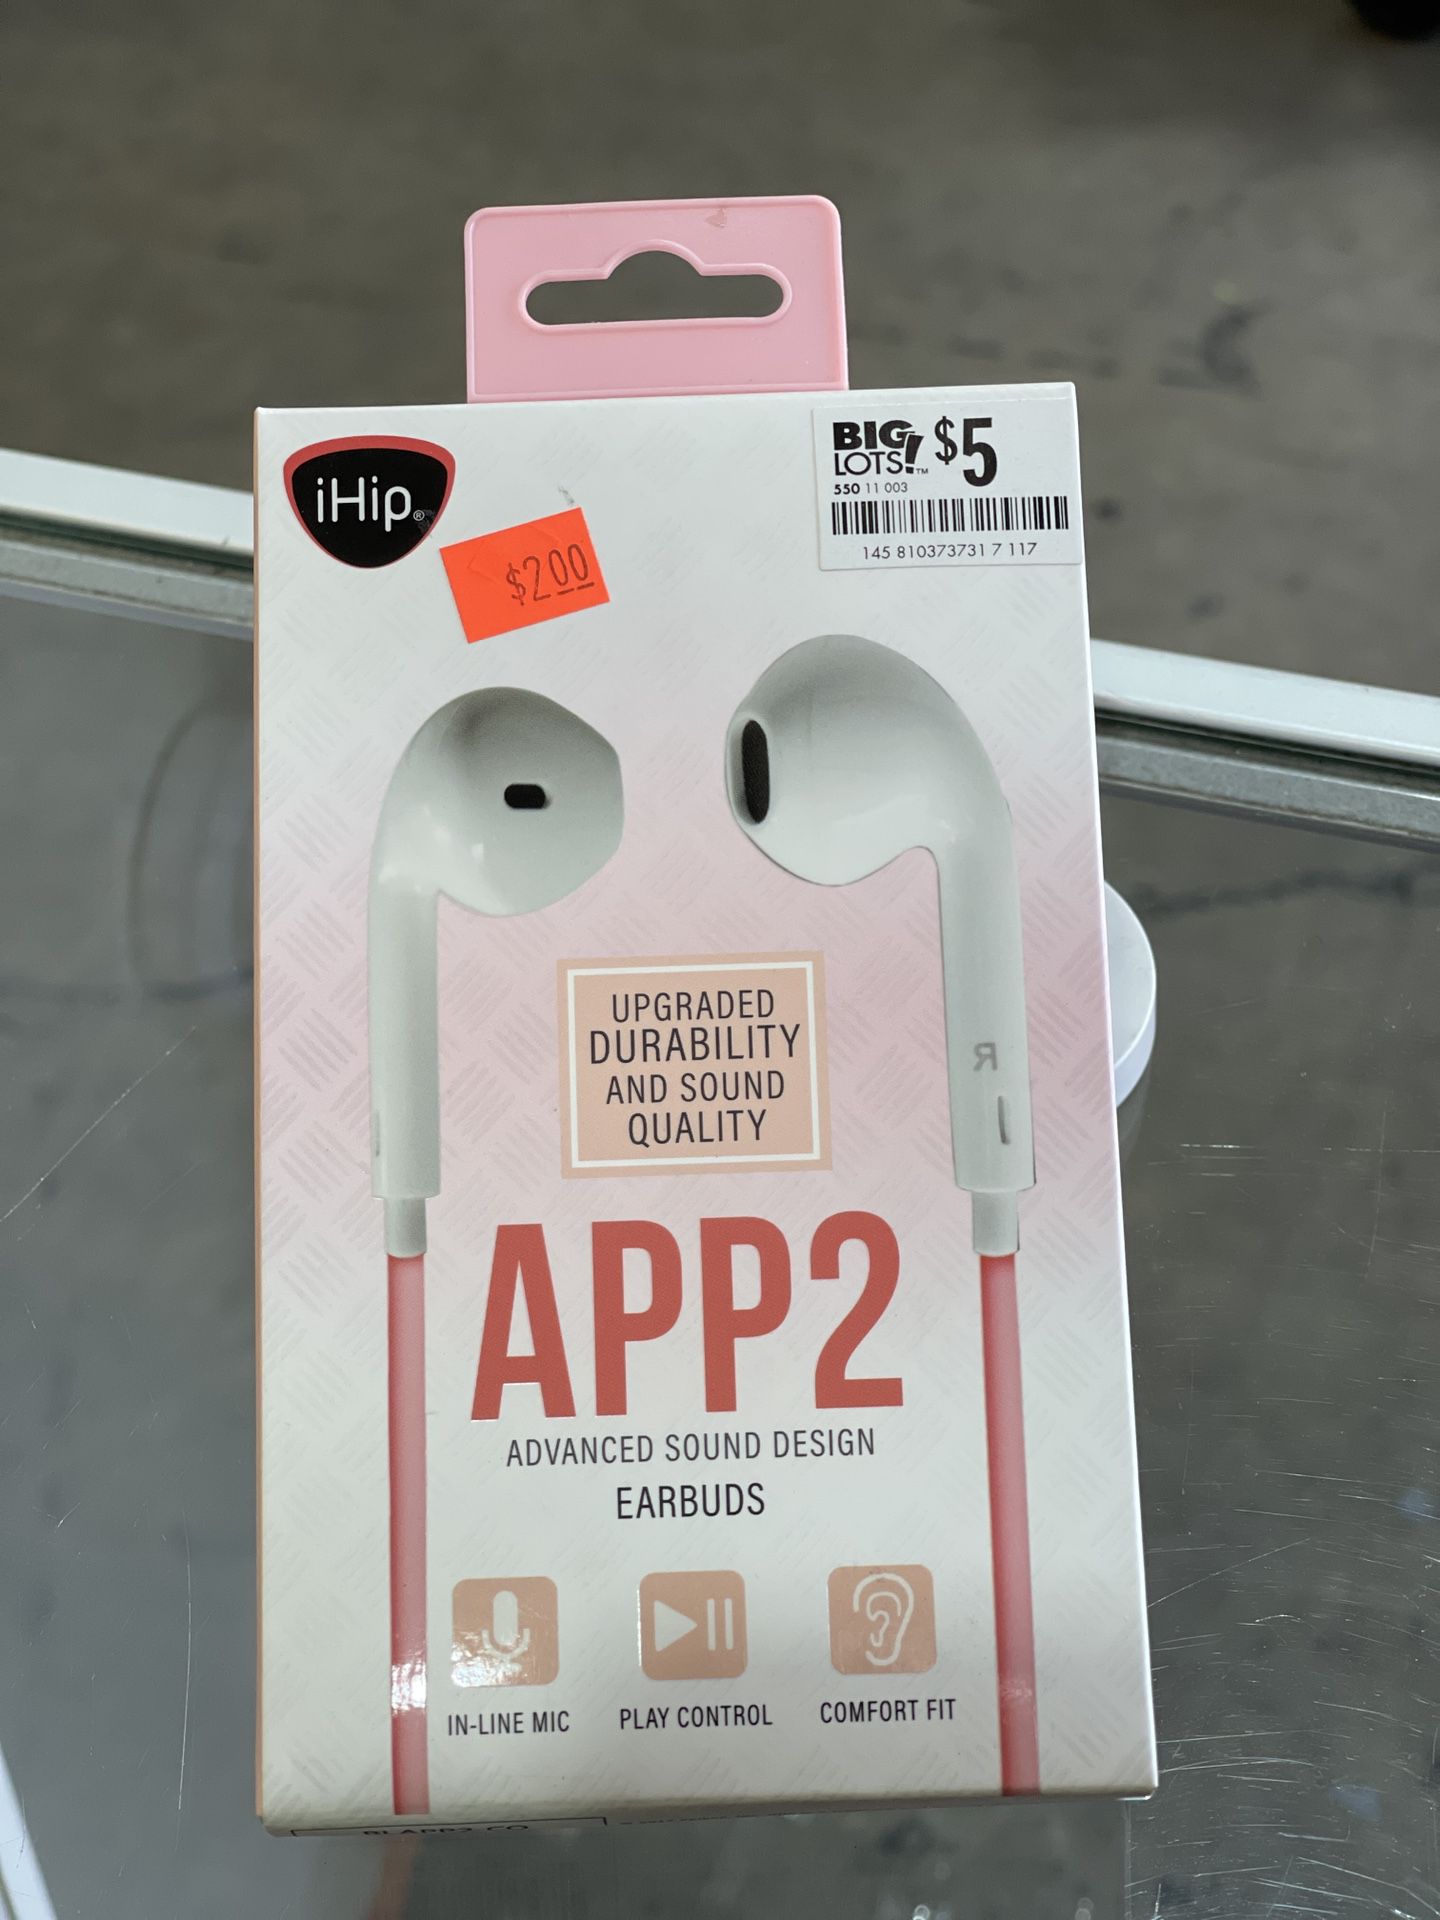 NEW Pink/White Cellphone Mobile Computer Earbuds for Listening to Music or Calls